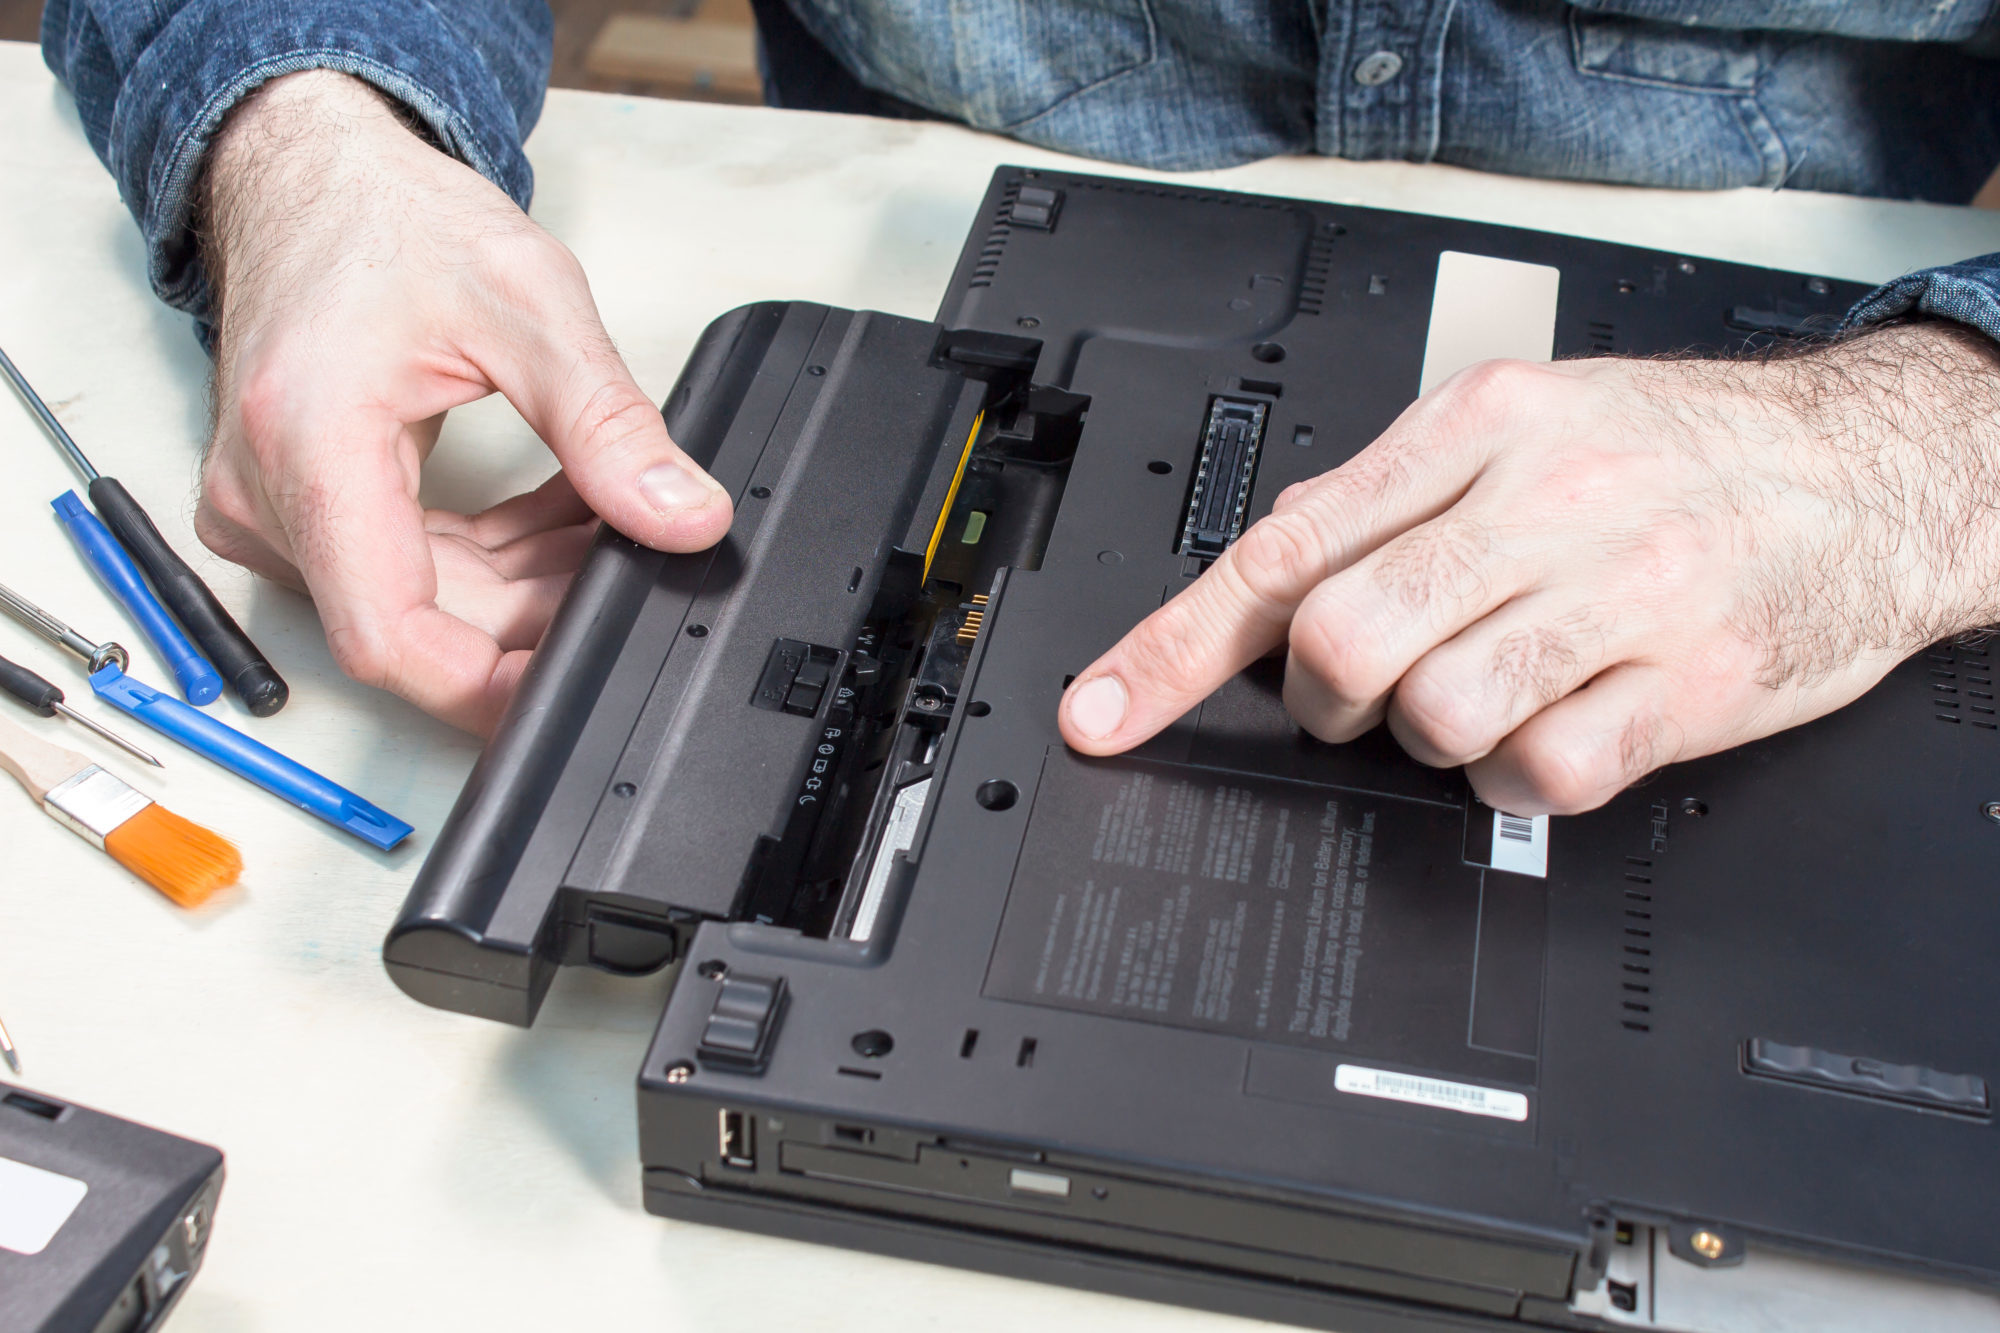 Laptop Battery Safety is No Laughing Matter